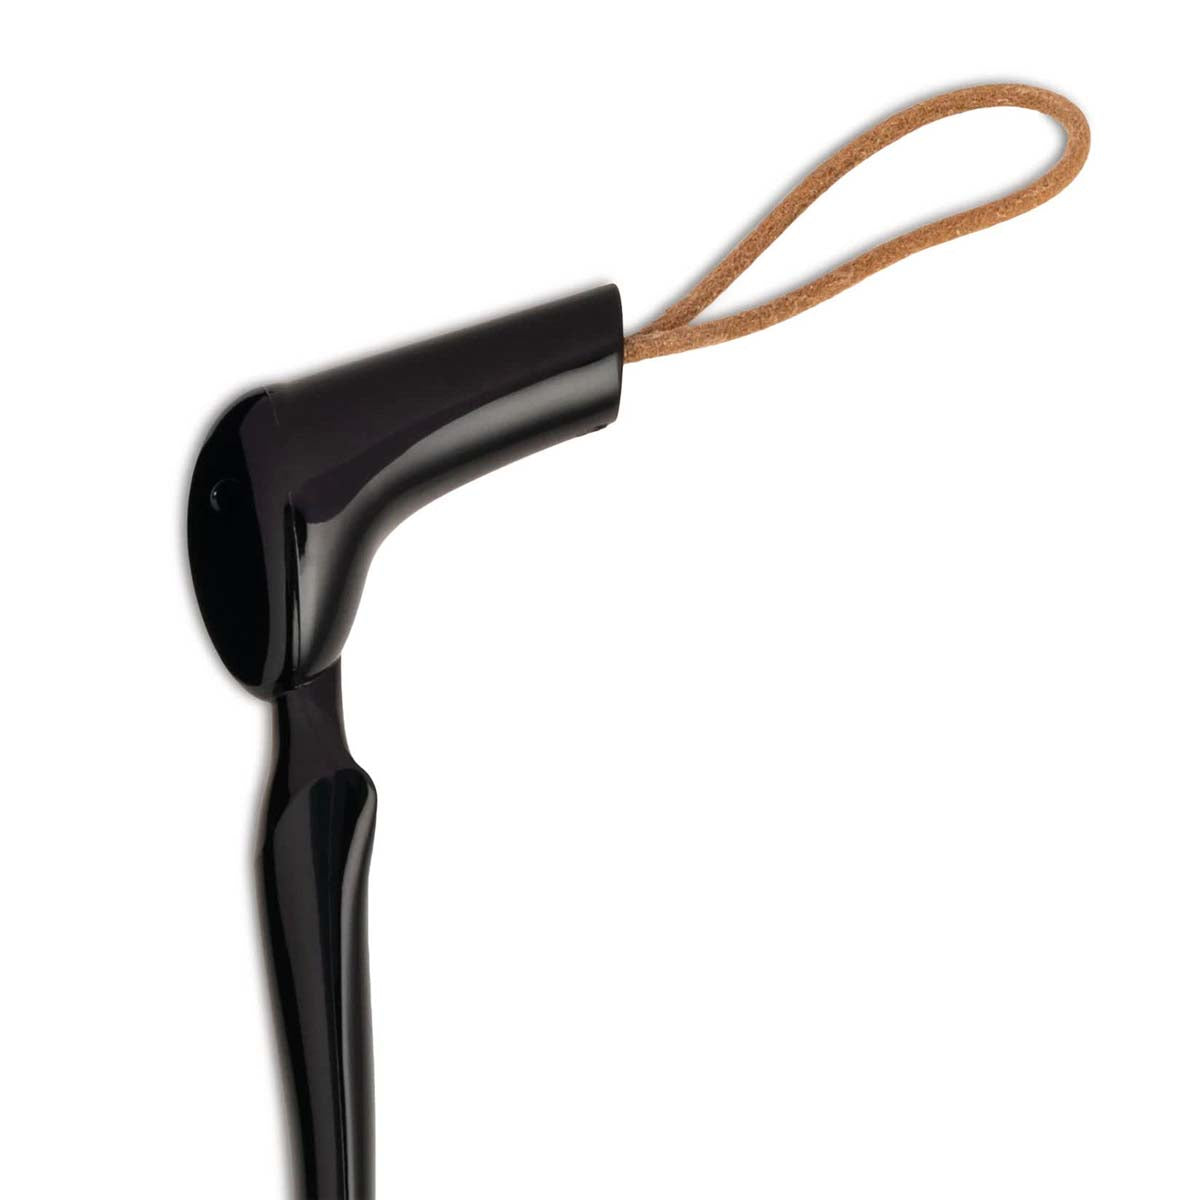 AHC01 B Germano Shoehorn in thermoplastic resin, black.